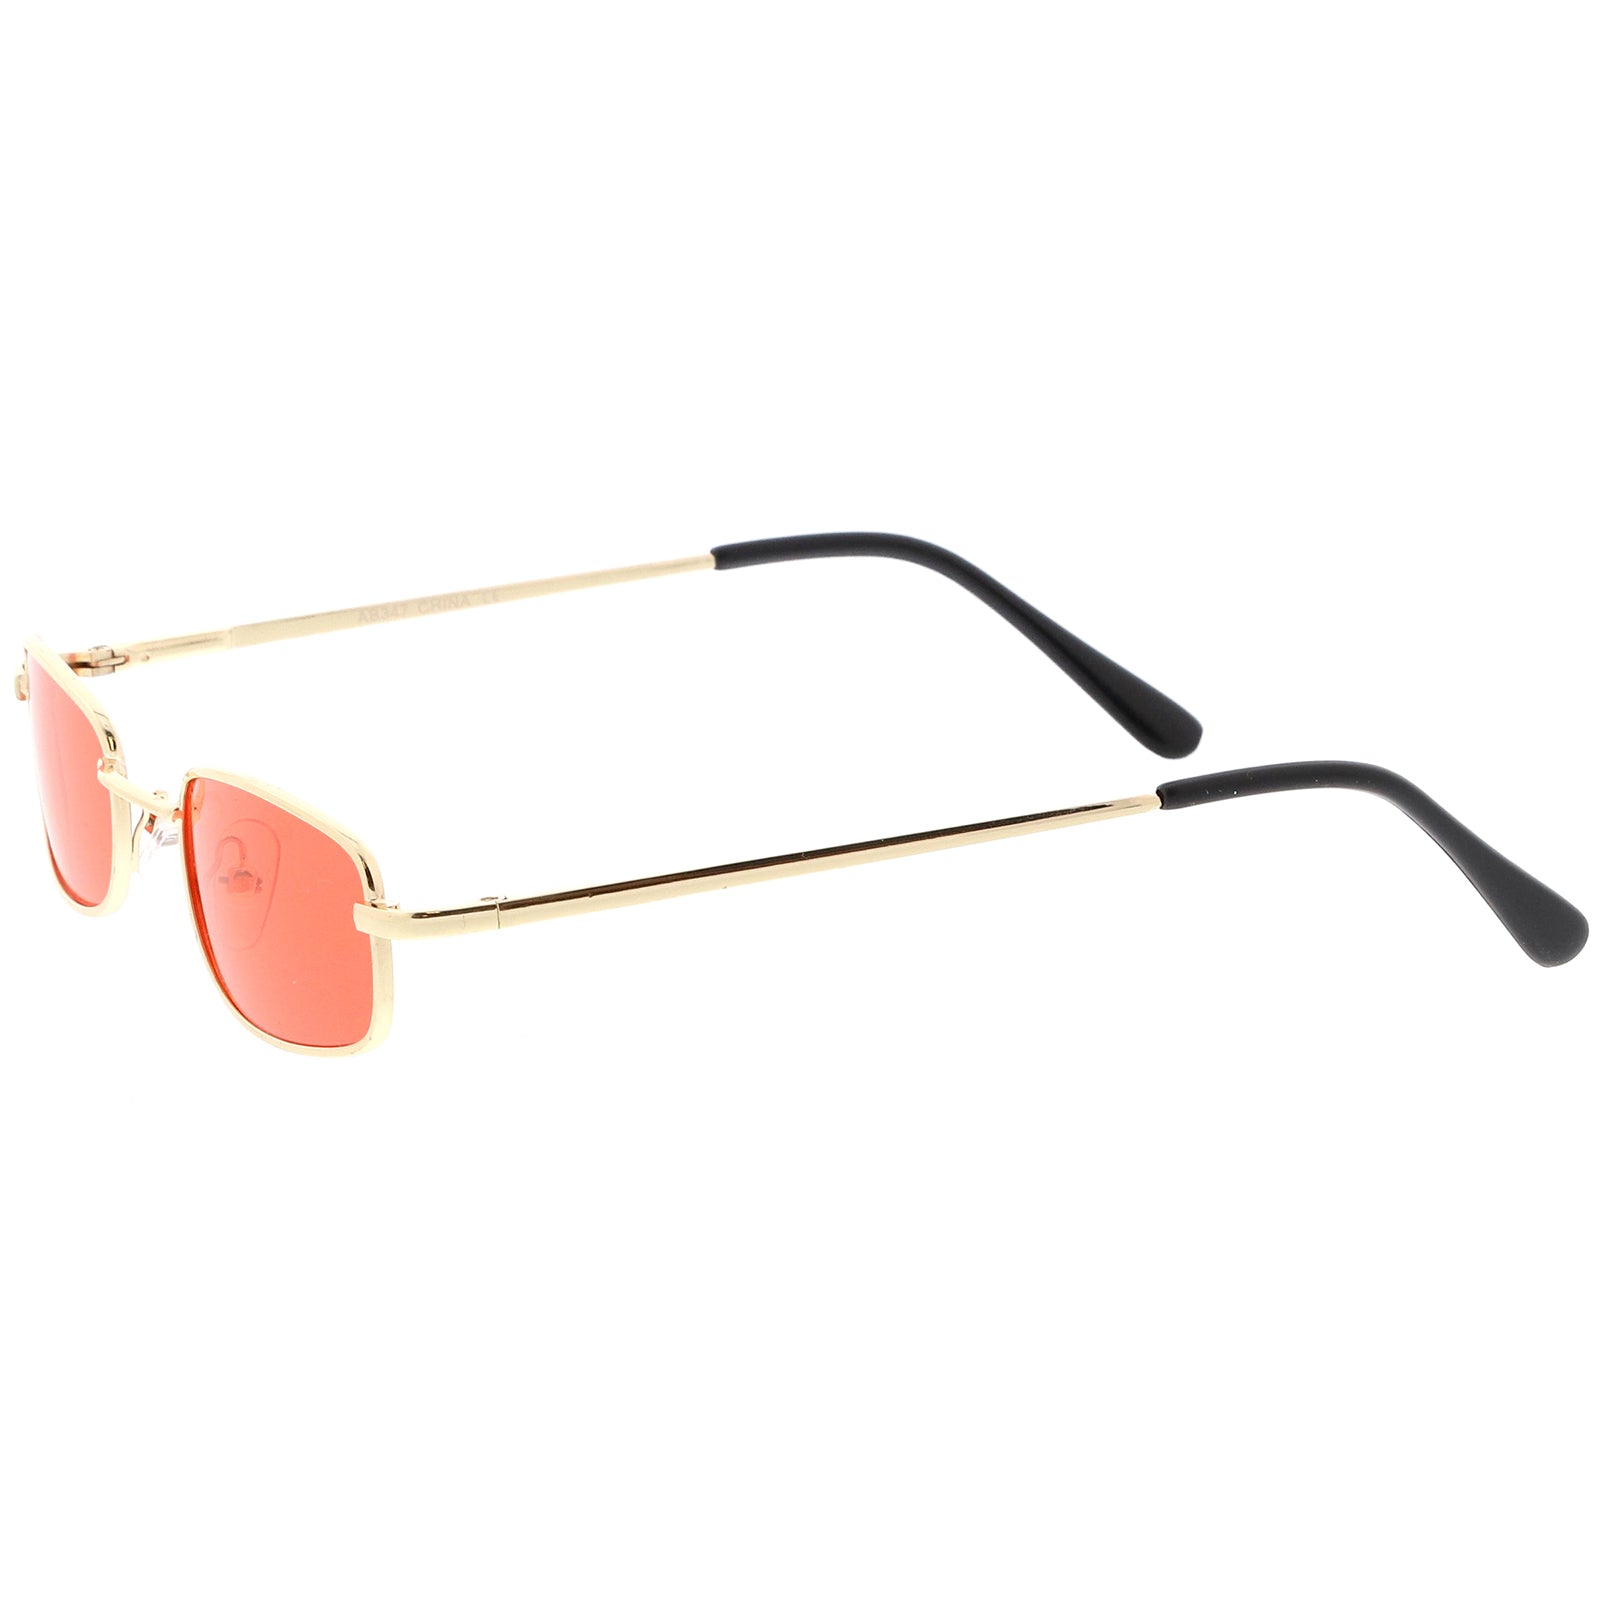 Slim 90s Inspired Color Tinted Lens Metal Square Sunglasses D121